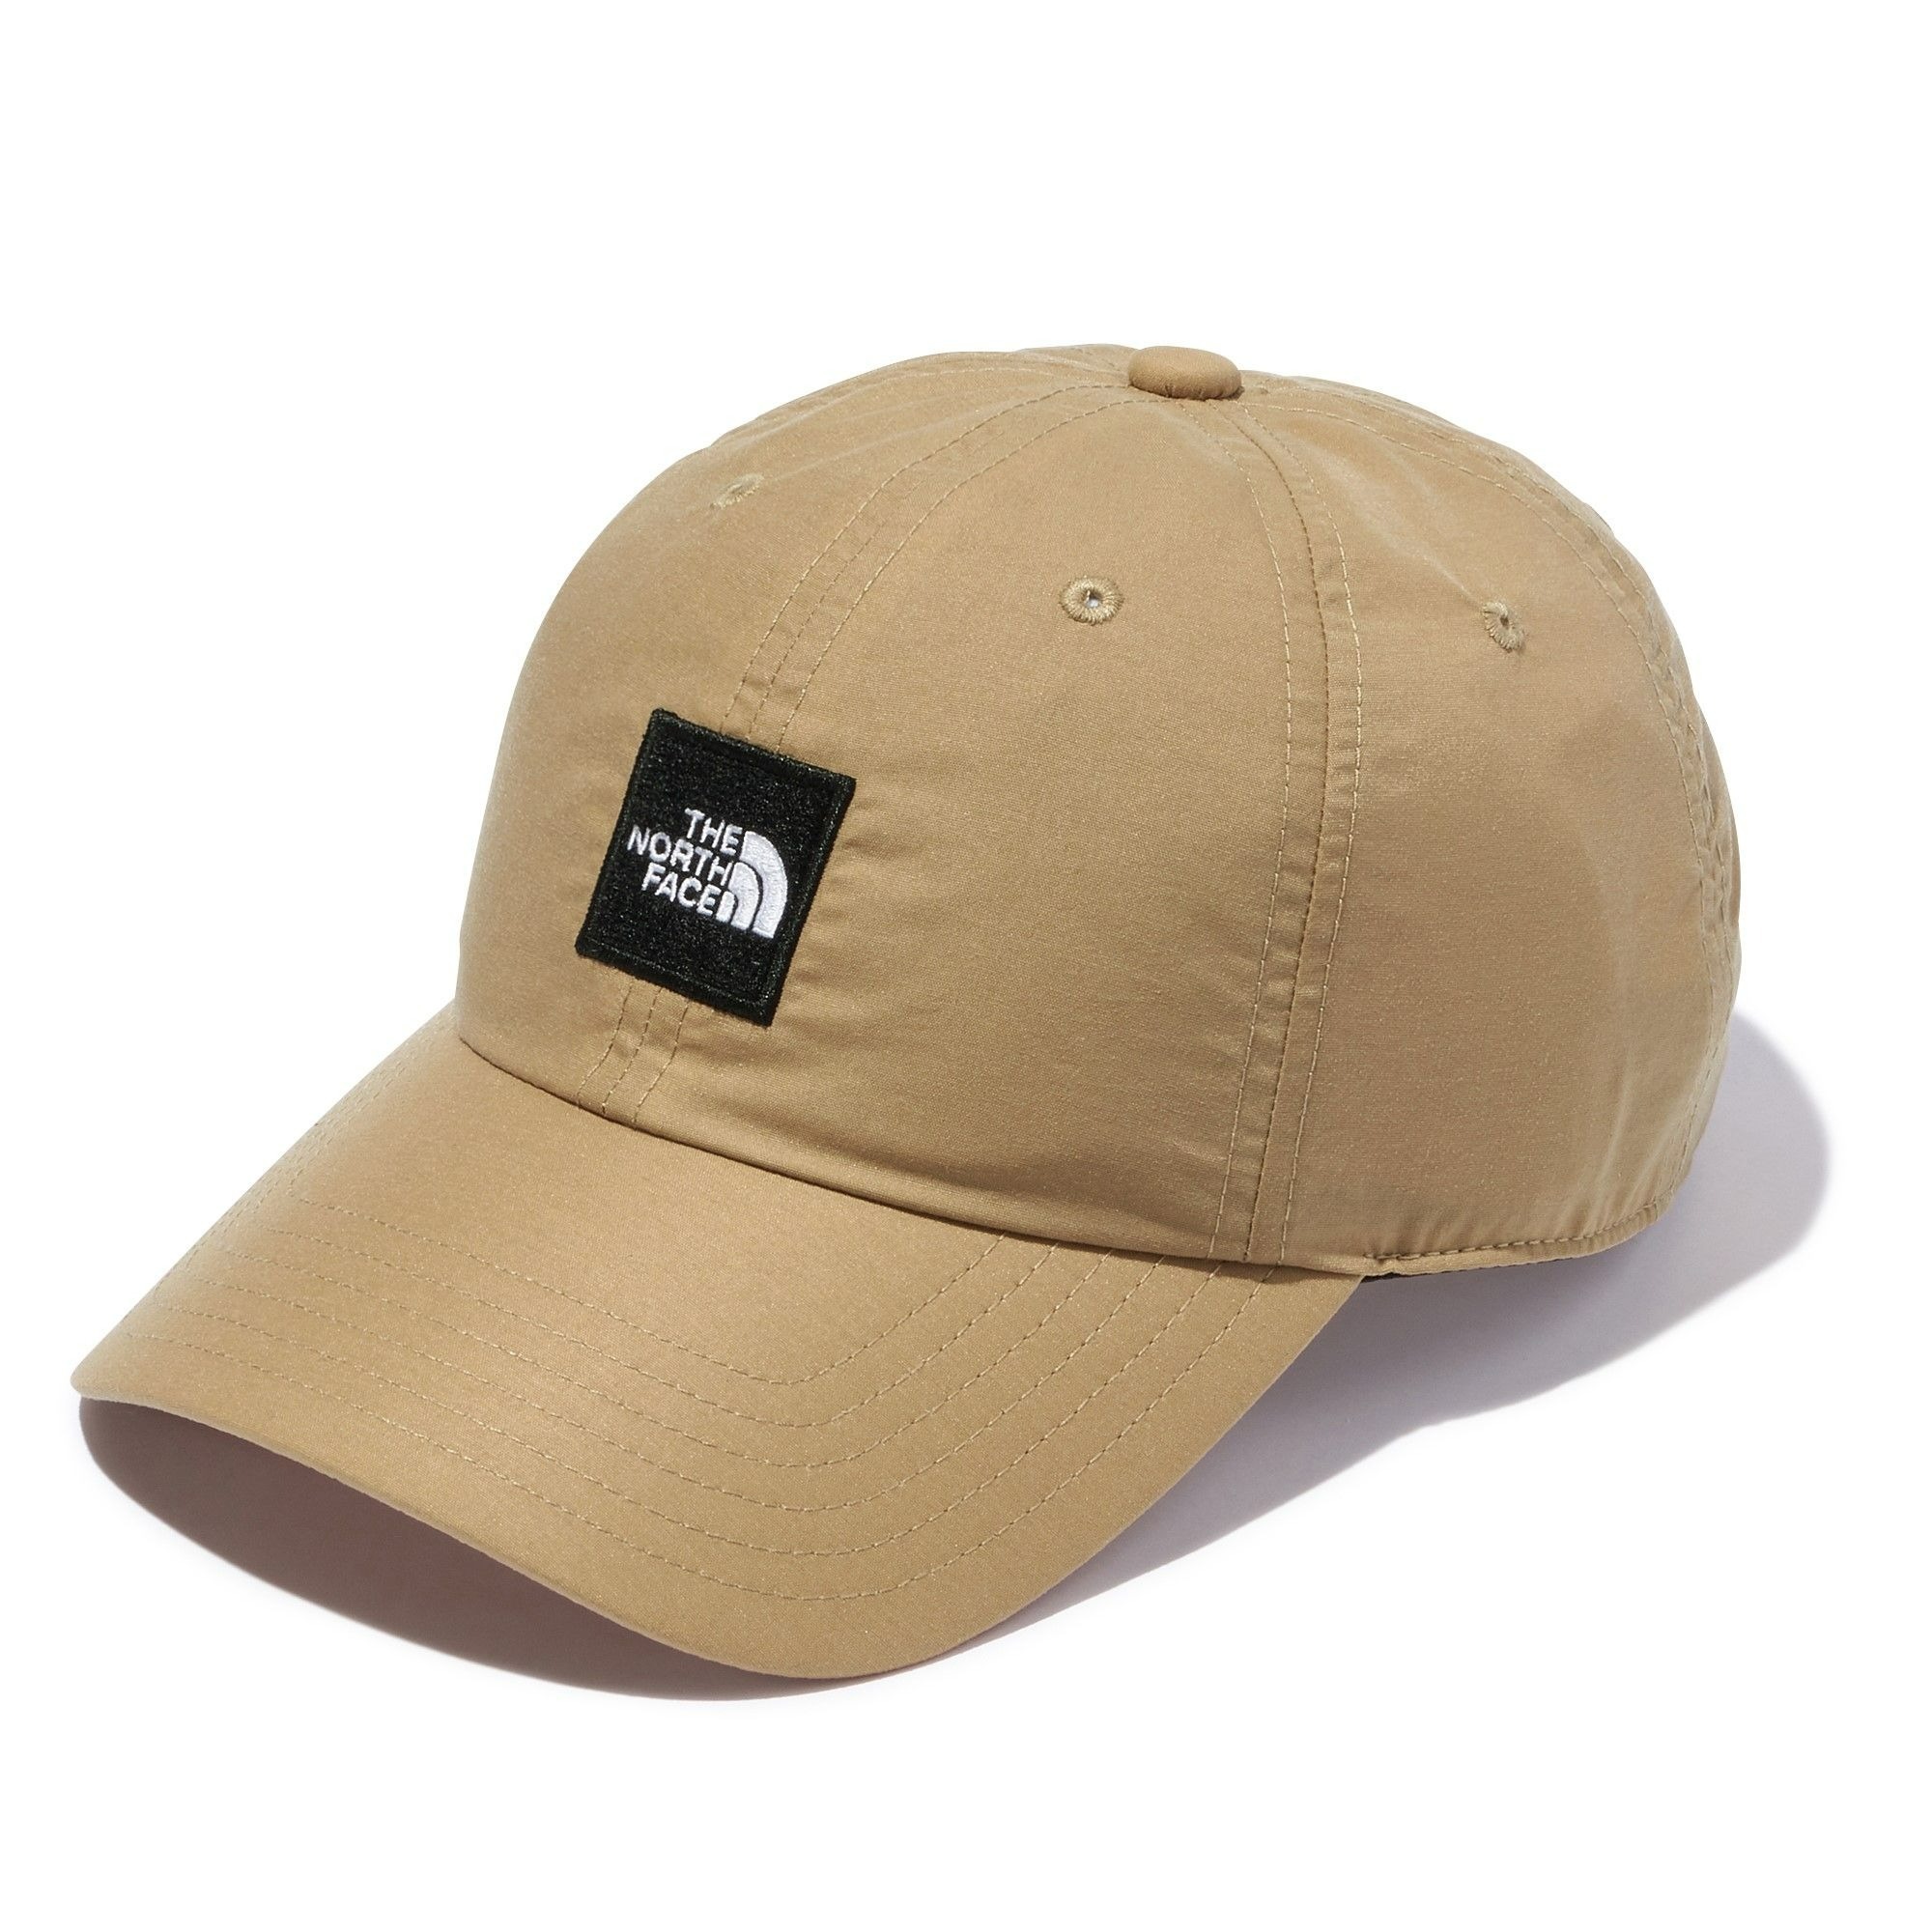 NNJ02302 日本THE NORTH FACE KIDS WHICHPATCH CAP 老帽 